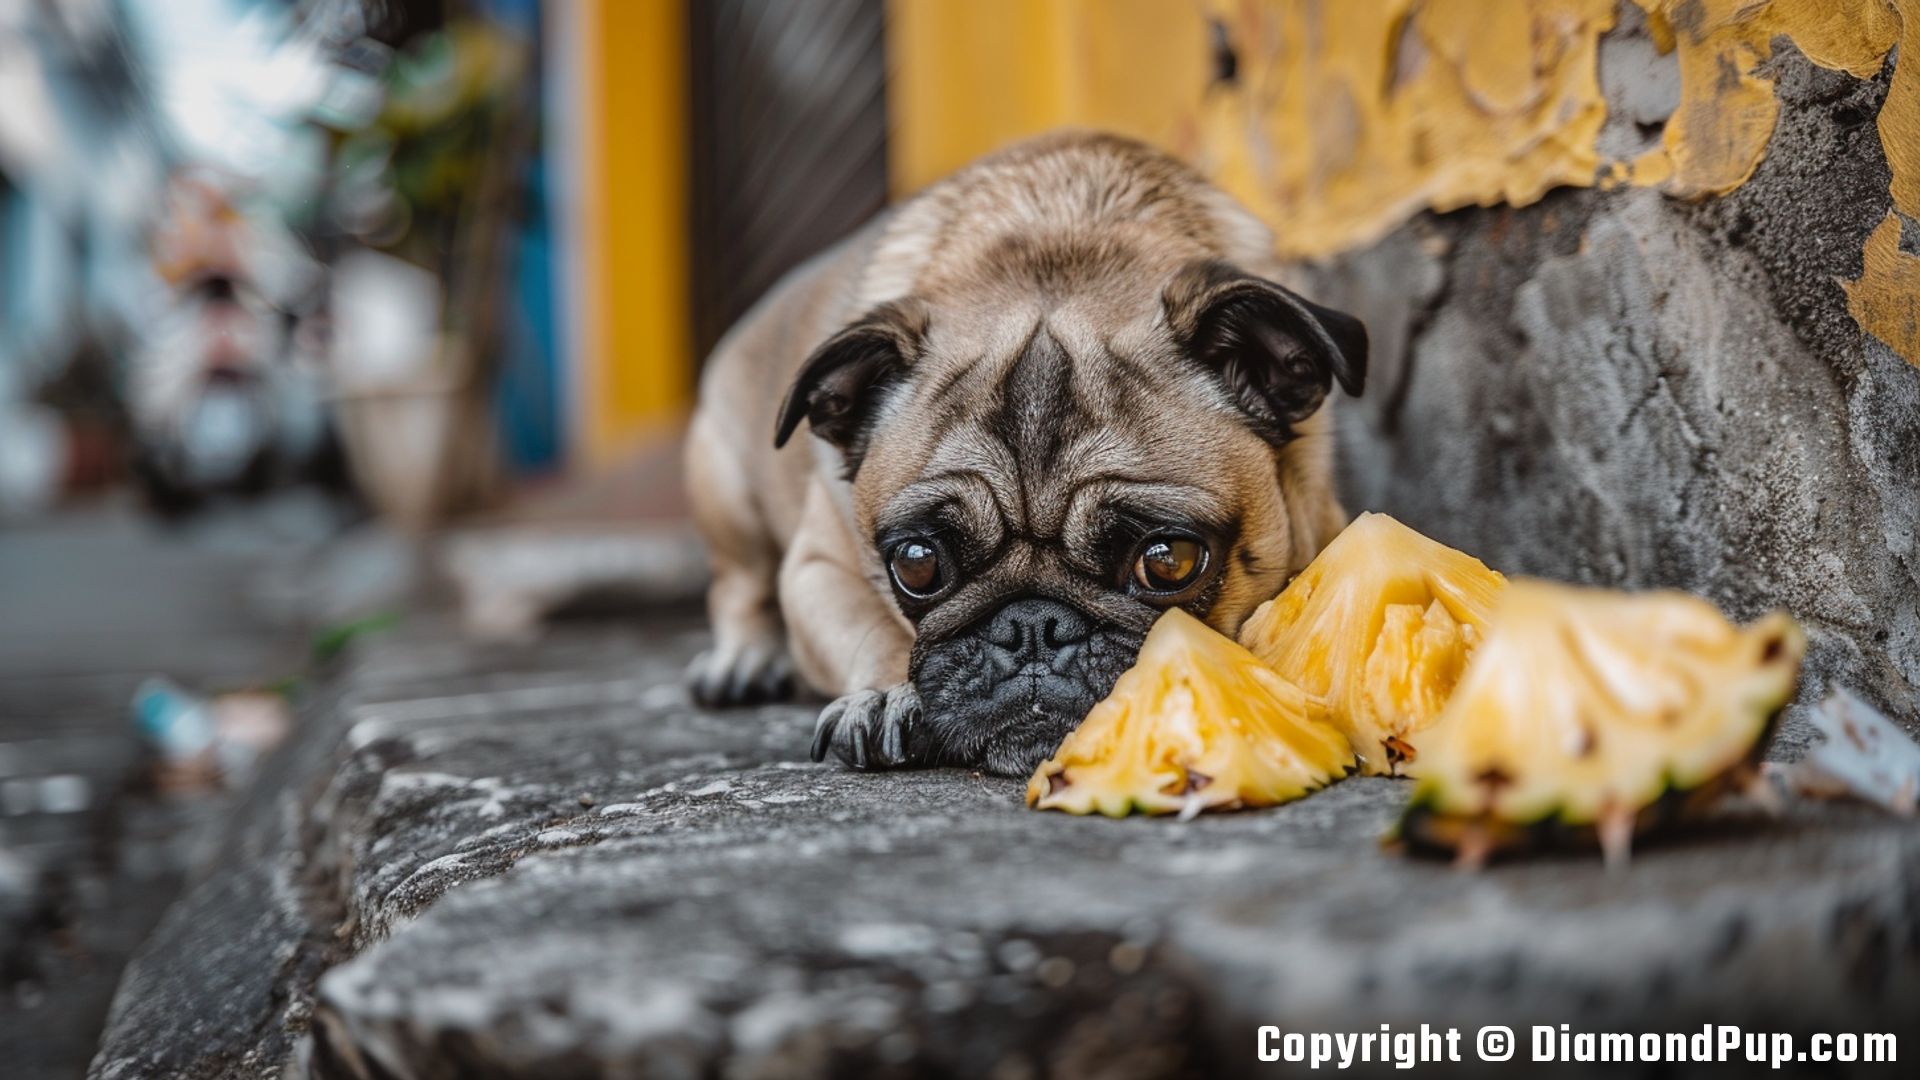 Photograph of a Cute Pug Eating Pineapple